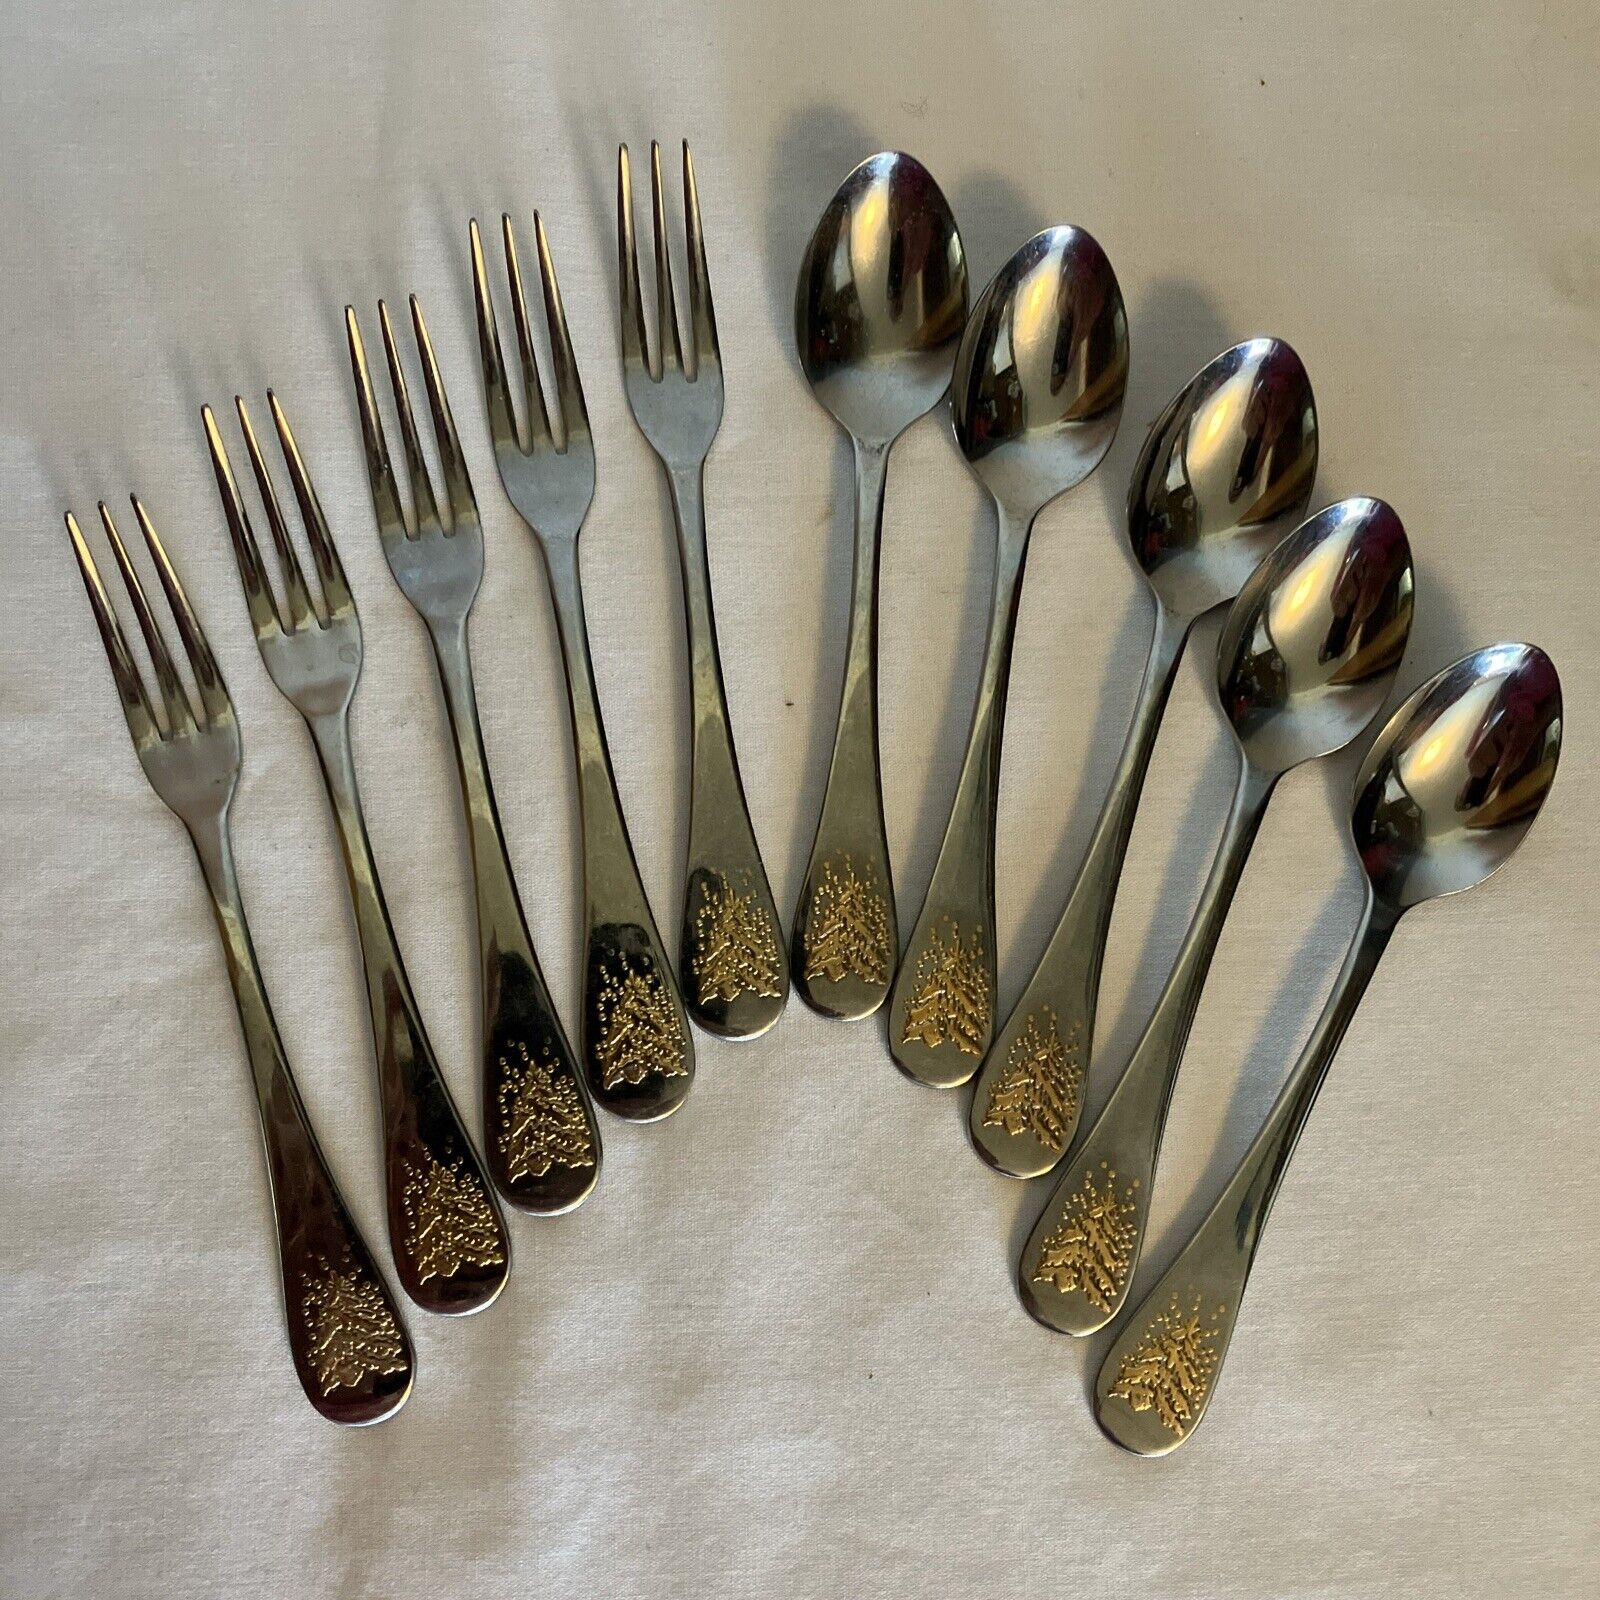 Set 10 Dansk Silhouette Gold Pine Stainless Steel Cocktail Forks Coffee Spoons